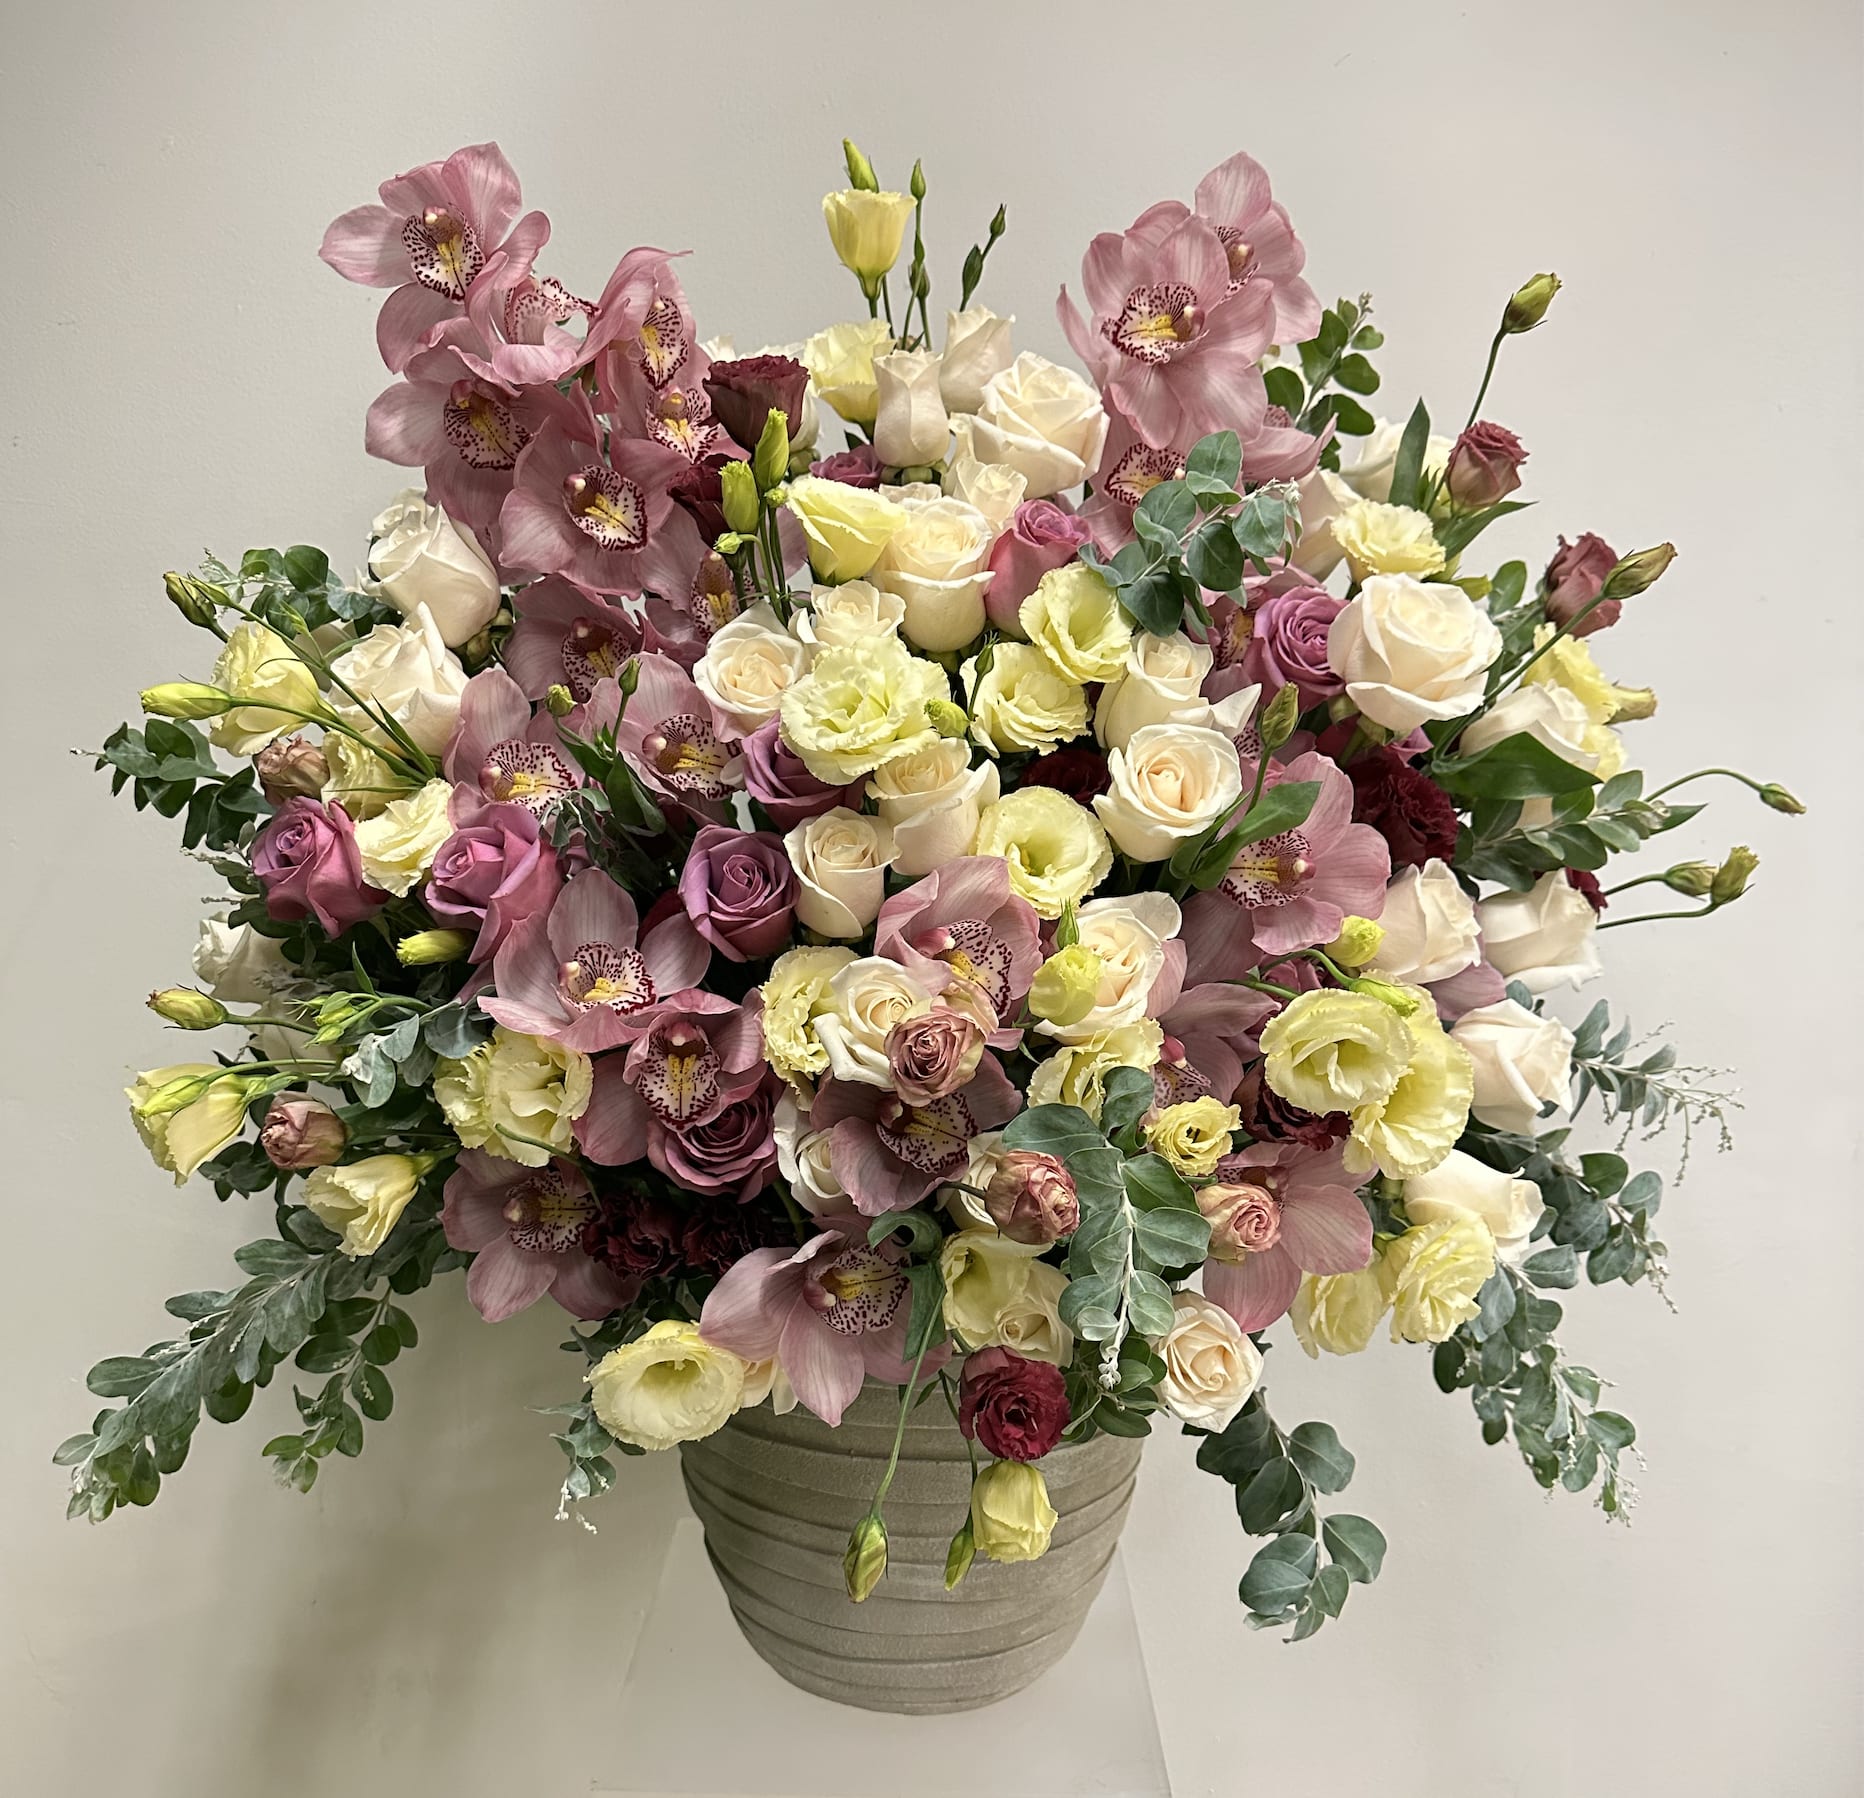 Floral Explosion  -  This arrangment features white roses, pink cymbidium orchids, and lisianthus in a sleek gray ceramic container. Standing at an impressive 3 feet tall and spanning 2 feet wide, this arrangement is a stunning showcase of premium blooms meticulously arranged to captivate the senses.